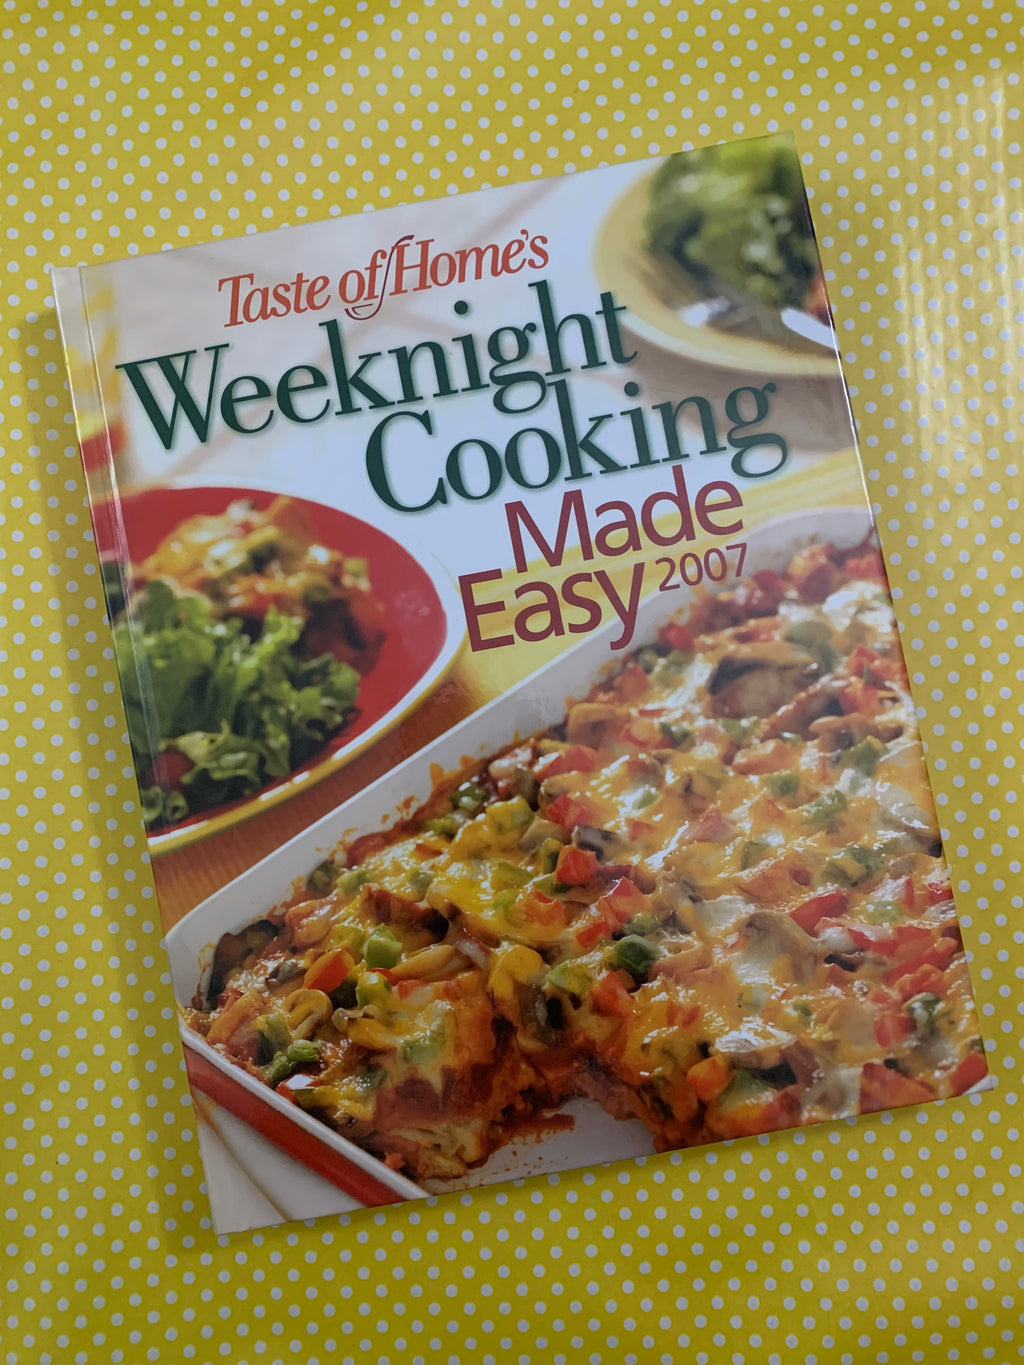 Taste of Home's: Weeknight Cooking Made Easy 2007